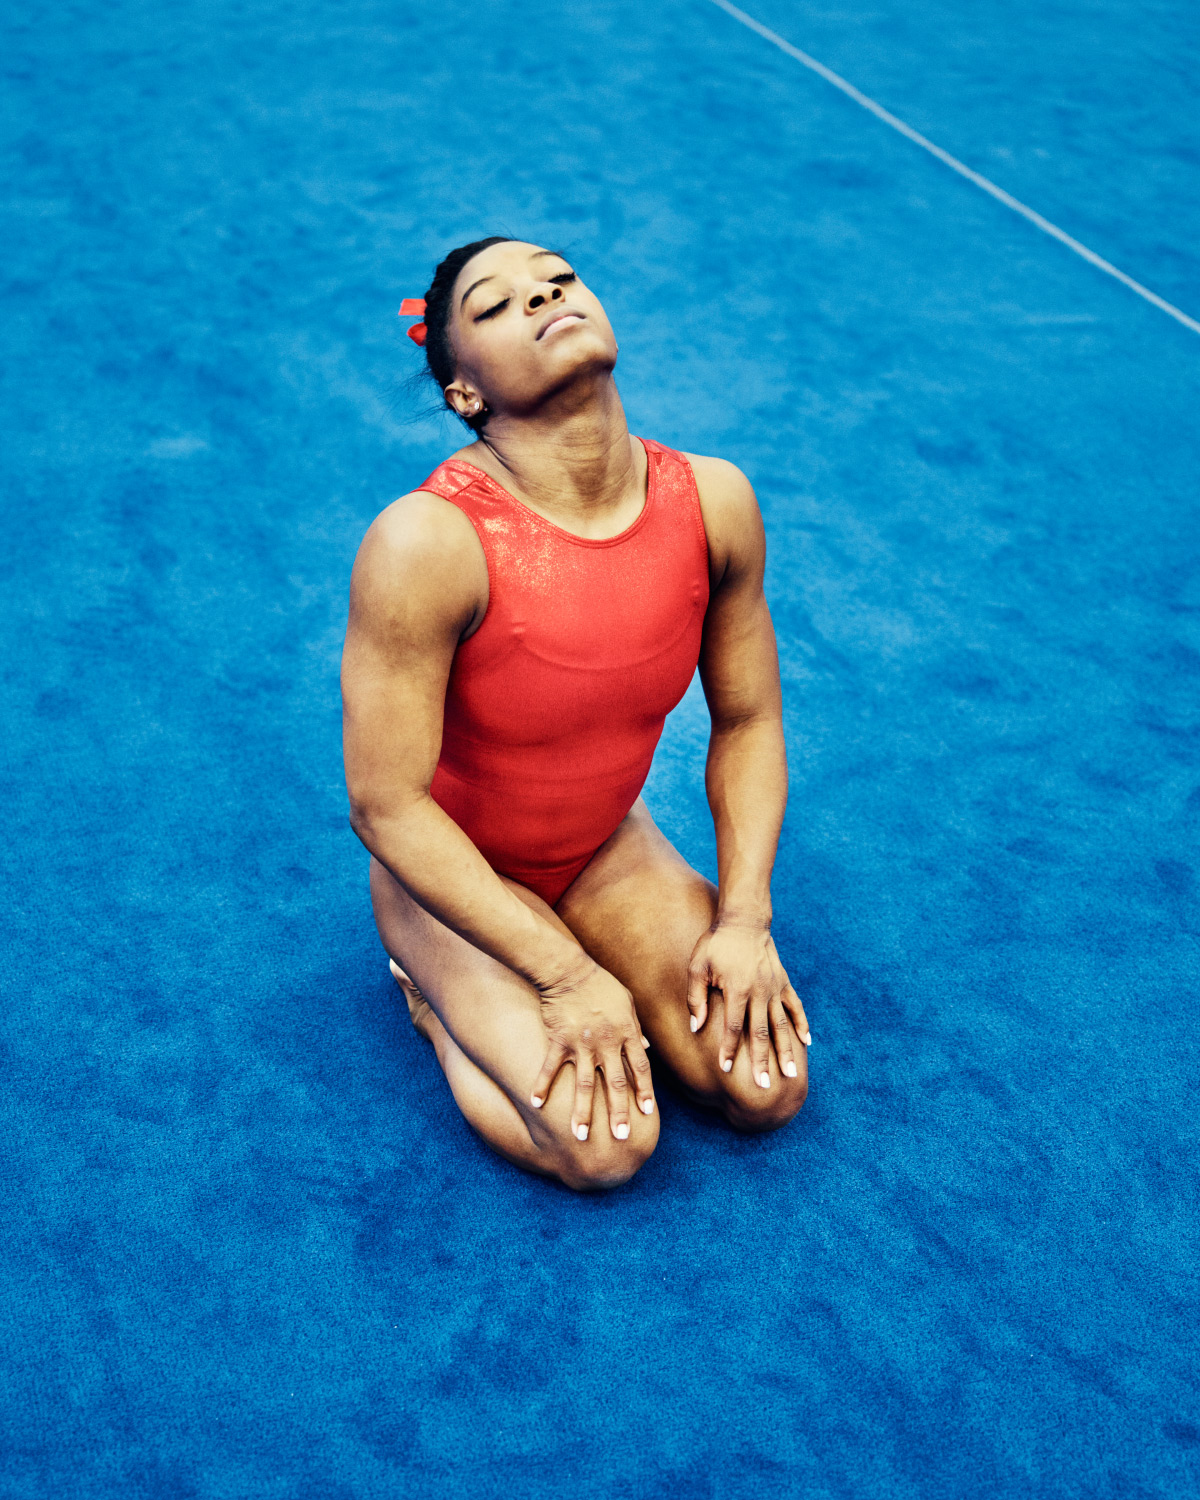 Gold Medal favorite Simone Biles stretches at her family’s World Champions Centre in Spring, TX on Thurs July 14, 2016. Biles competes in the Women’s team final on August 9, and the Women’s all-around individual final on August 11.